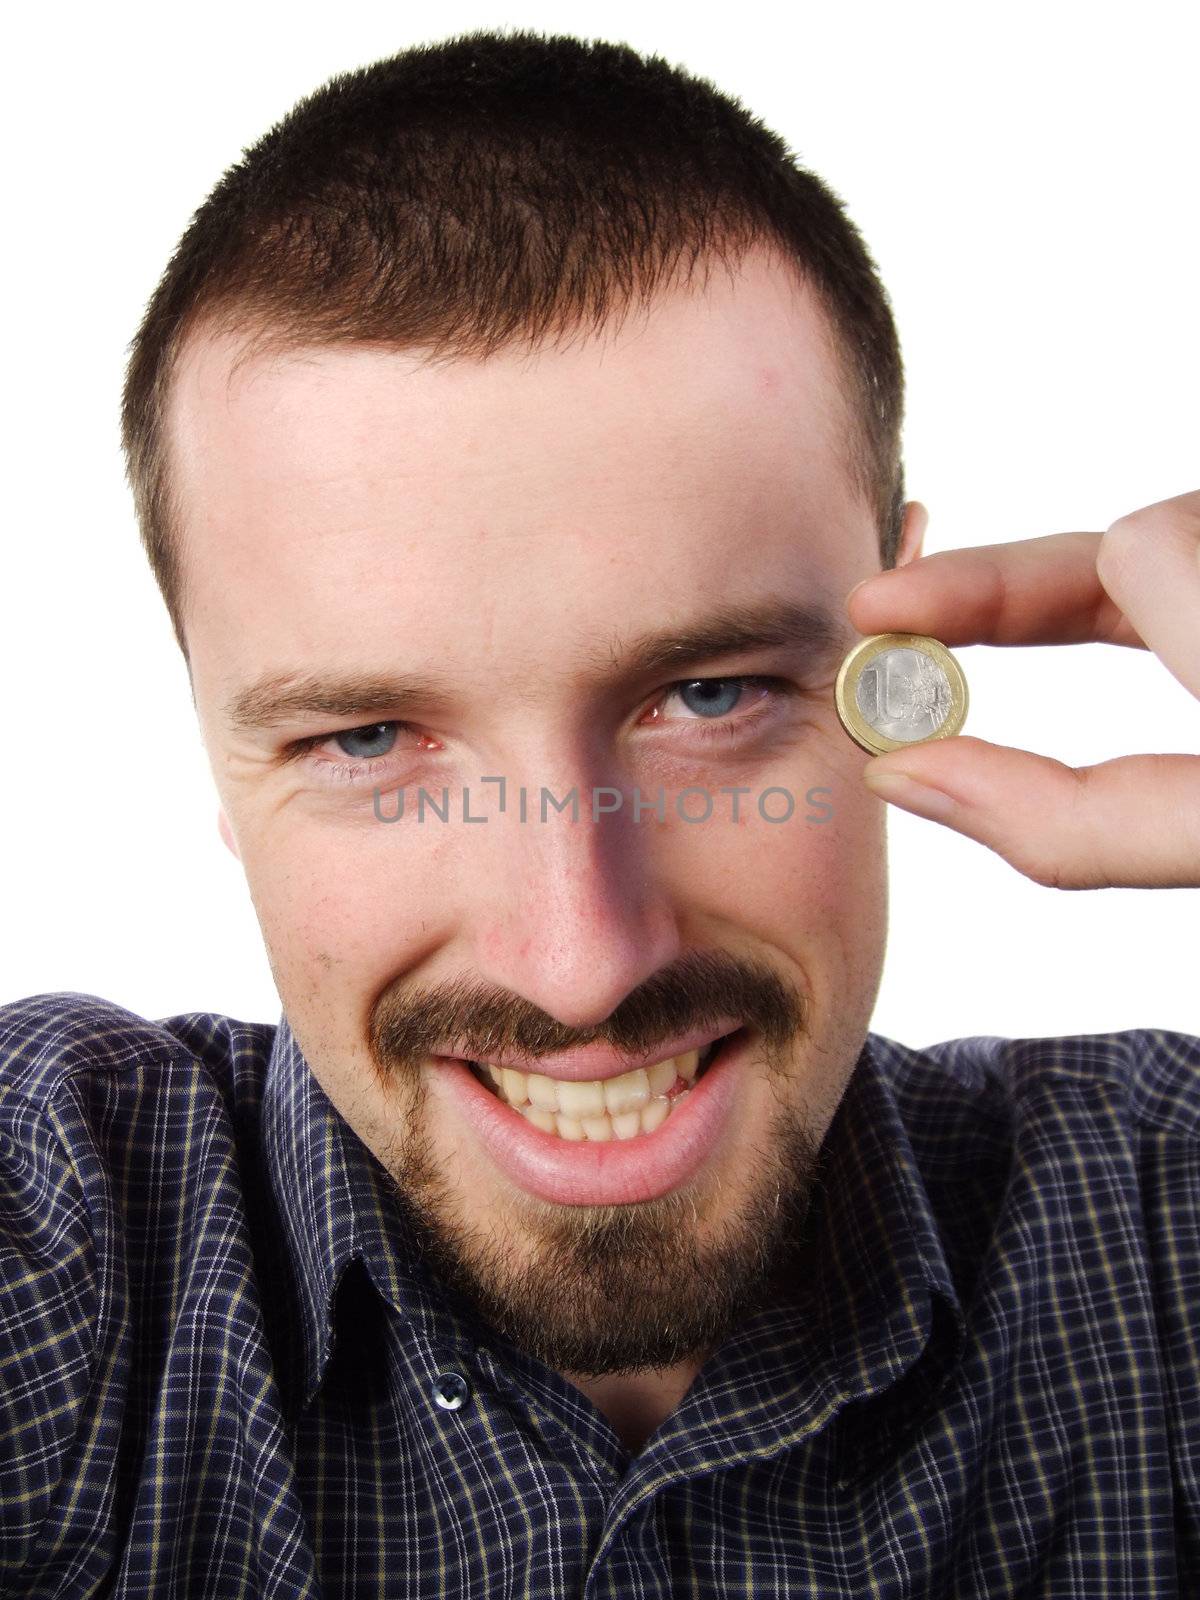 Young adult male happy to have earned some cash. Holding 1 Euro coin in his hand and smiling.